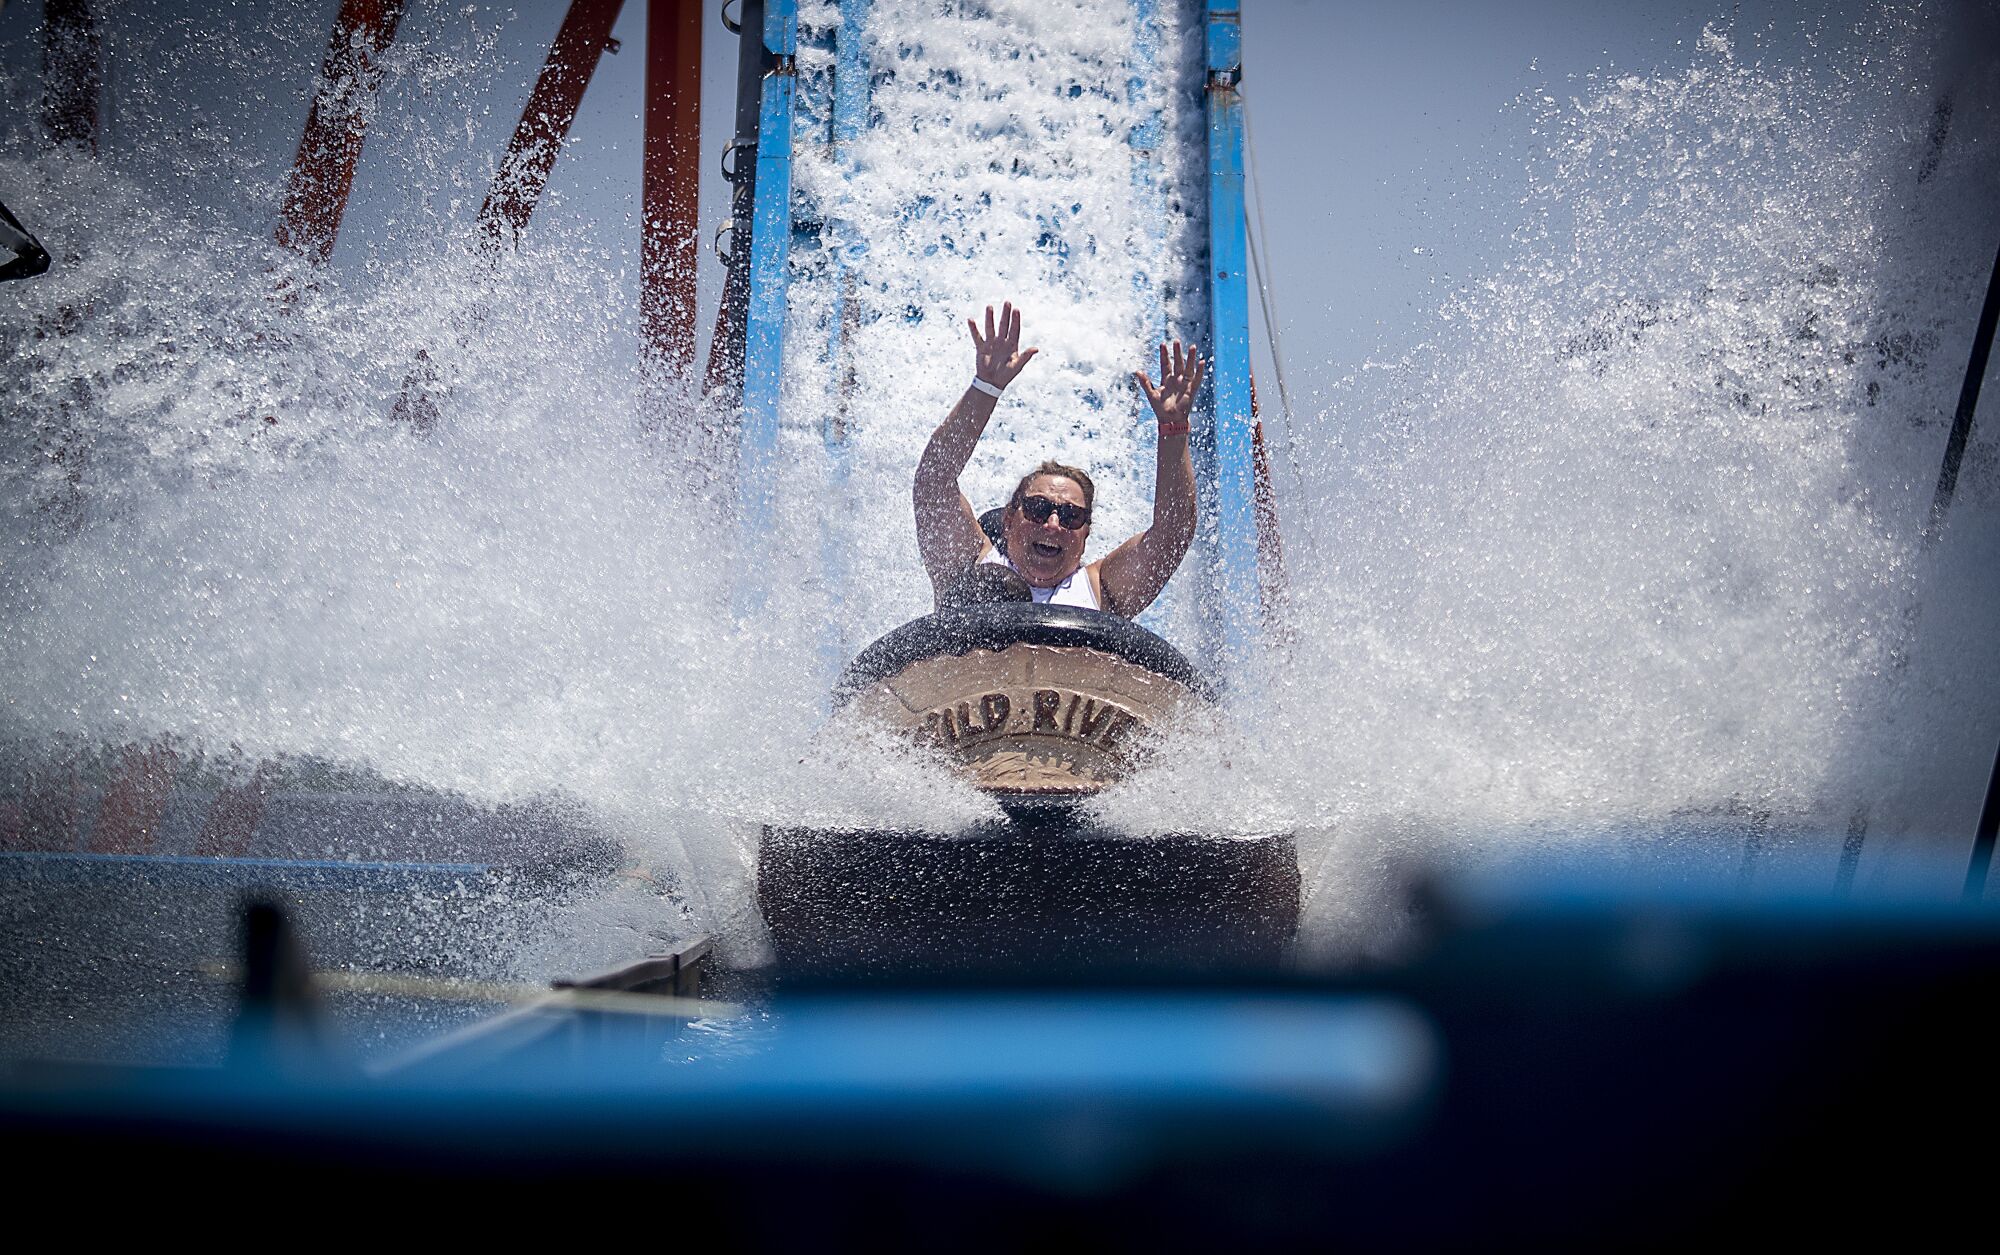 A woman rides the Wild River ride at the Orange County Fair.